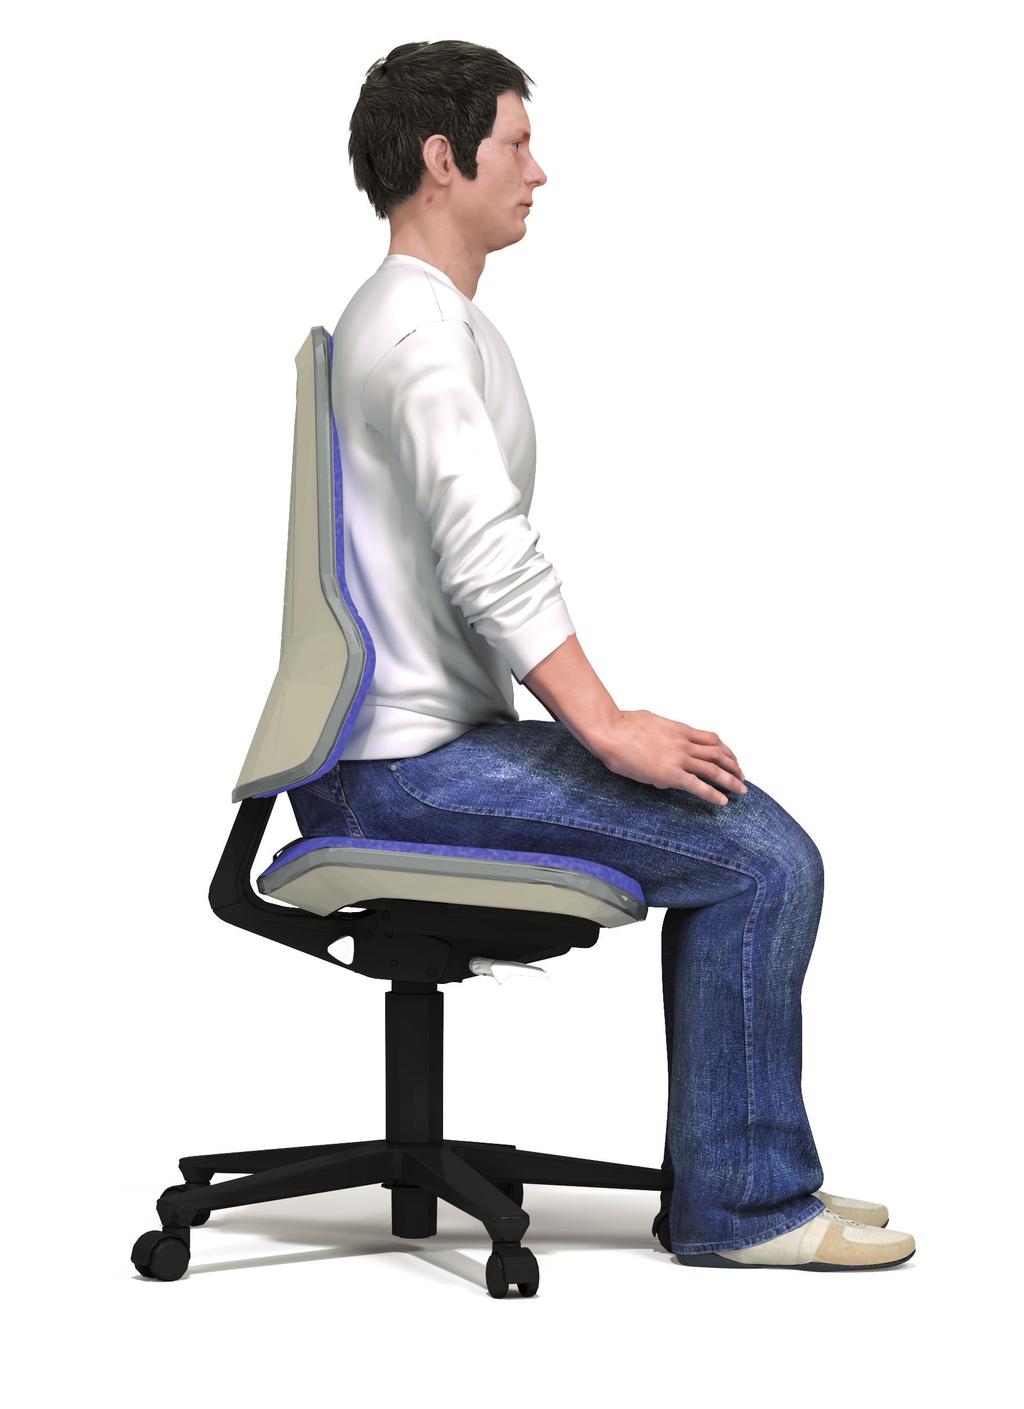 How to adjust your Treston workplace chair Ergonomically sound chair is a vital part of a well-functioning, ergonomic and user-friendly workstation.